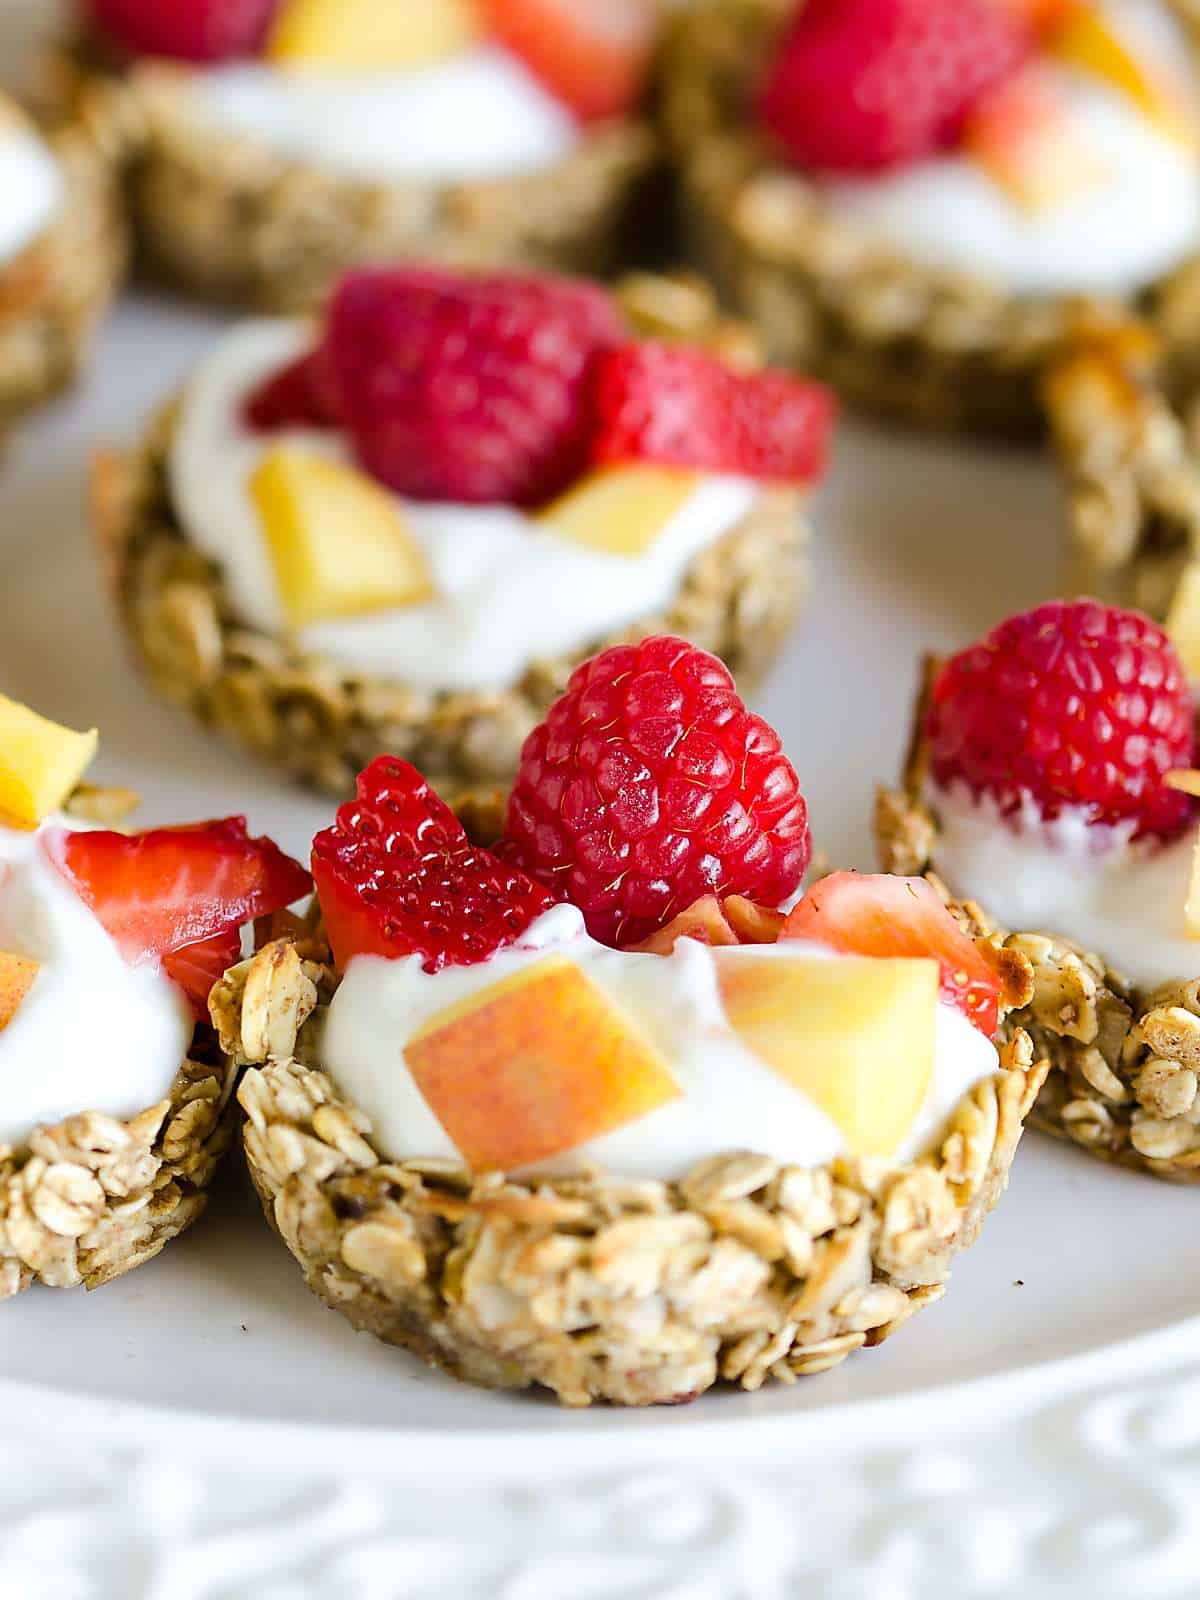 granola cup filled with yogurt, peaches, strawberries and rasbperries